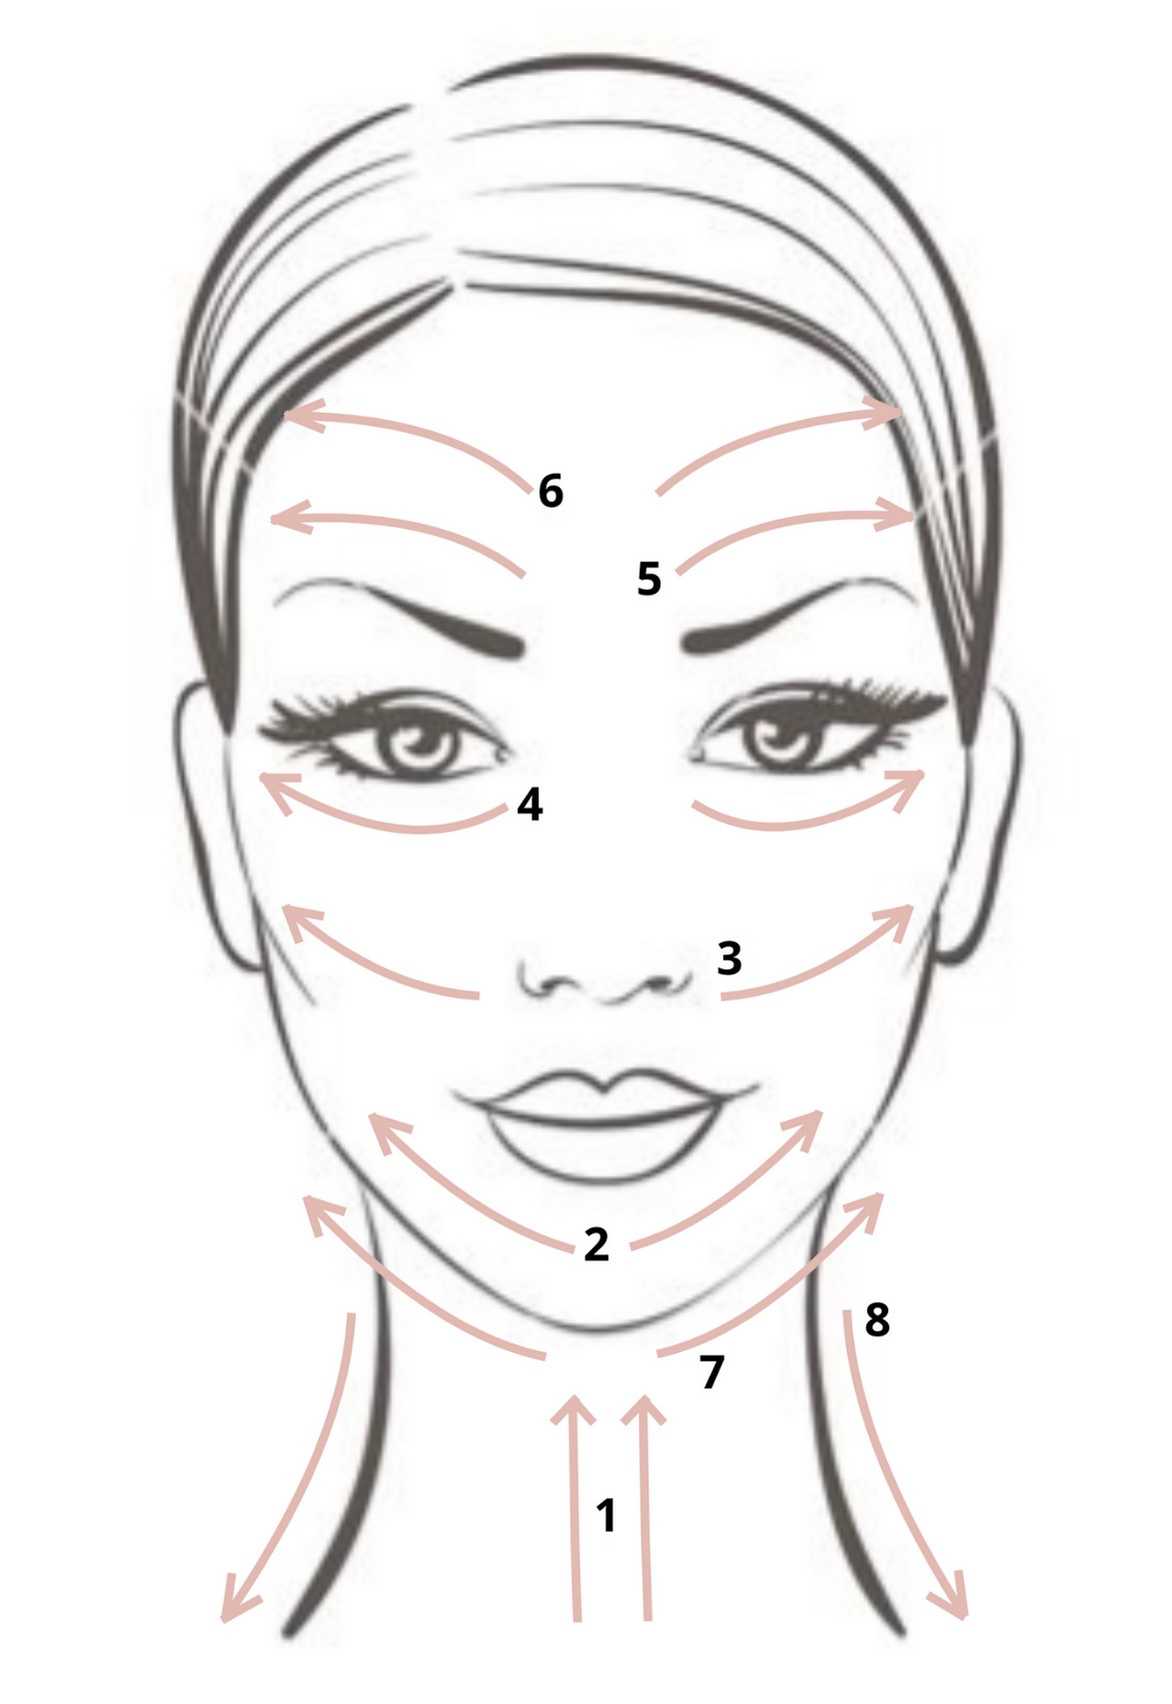 black-and-white-drawing-of-face-showing-massage-lines-for-gua-sha-facial-massage